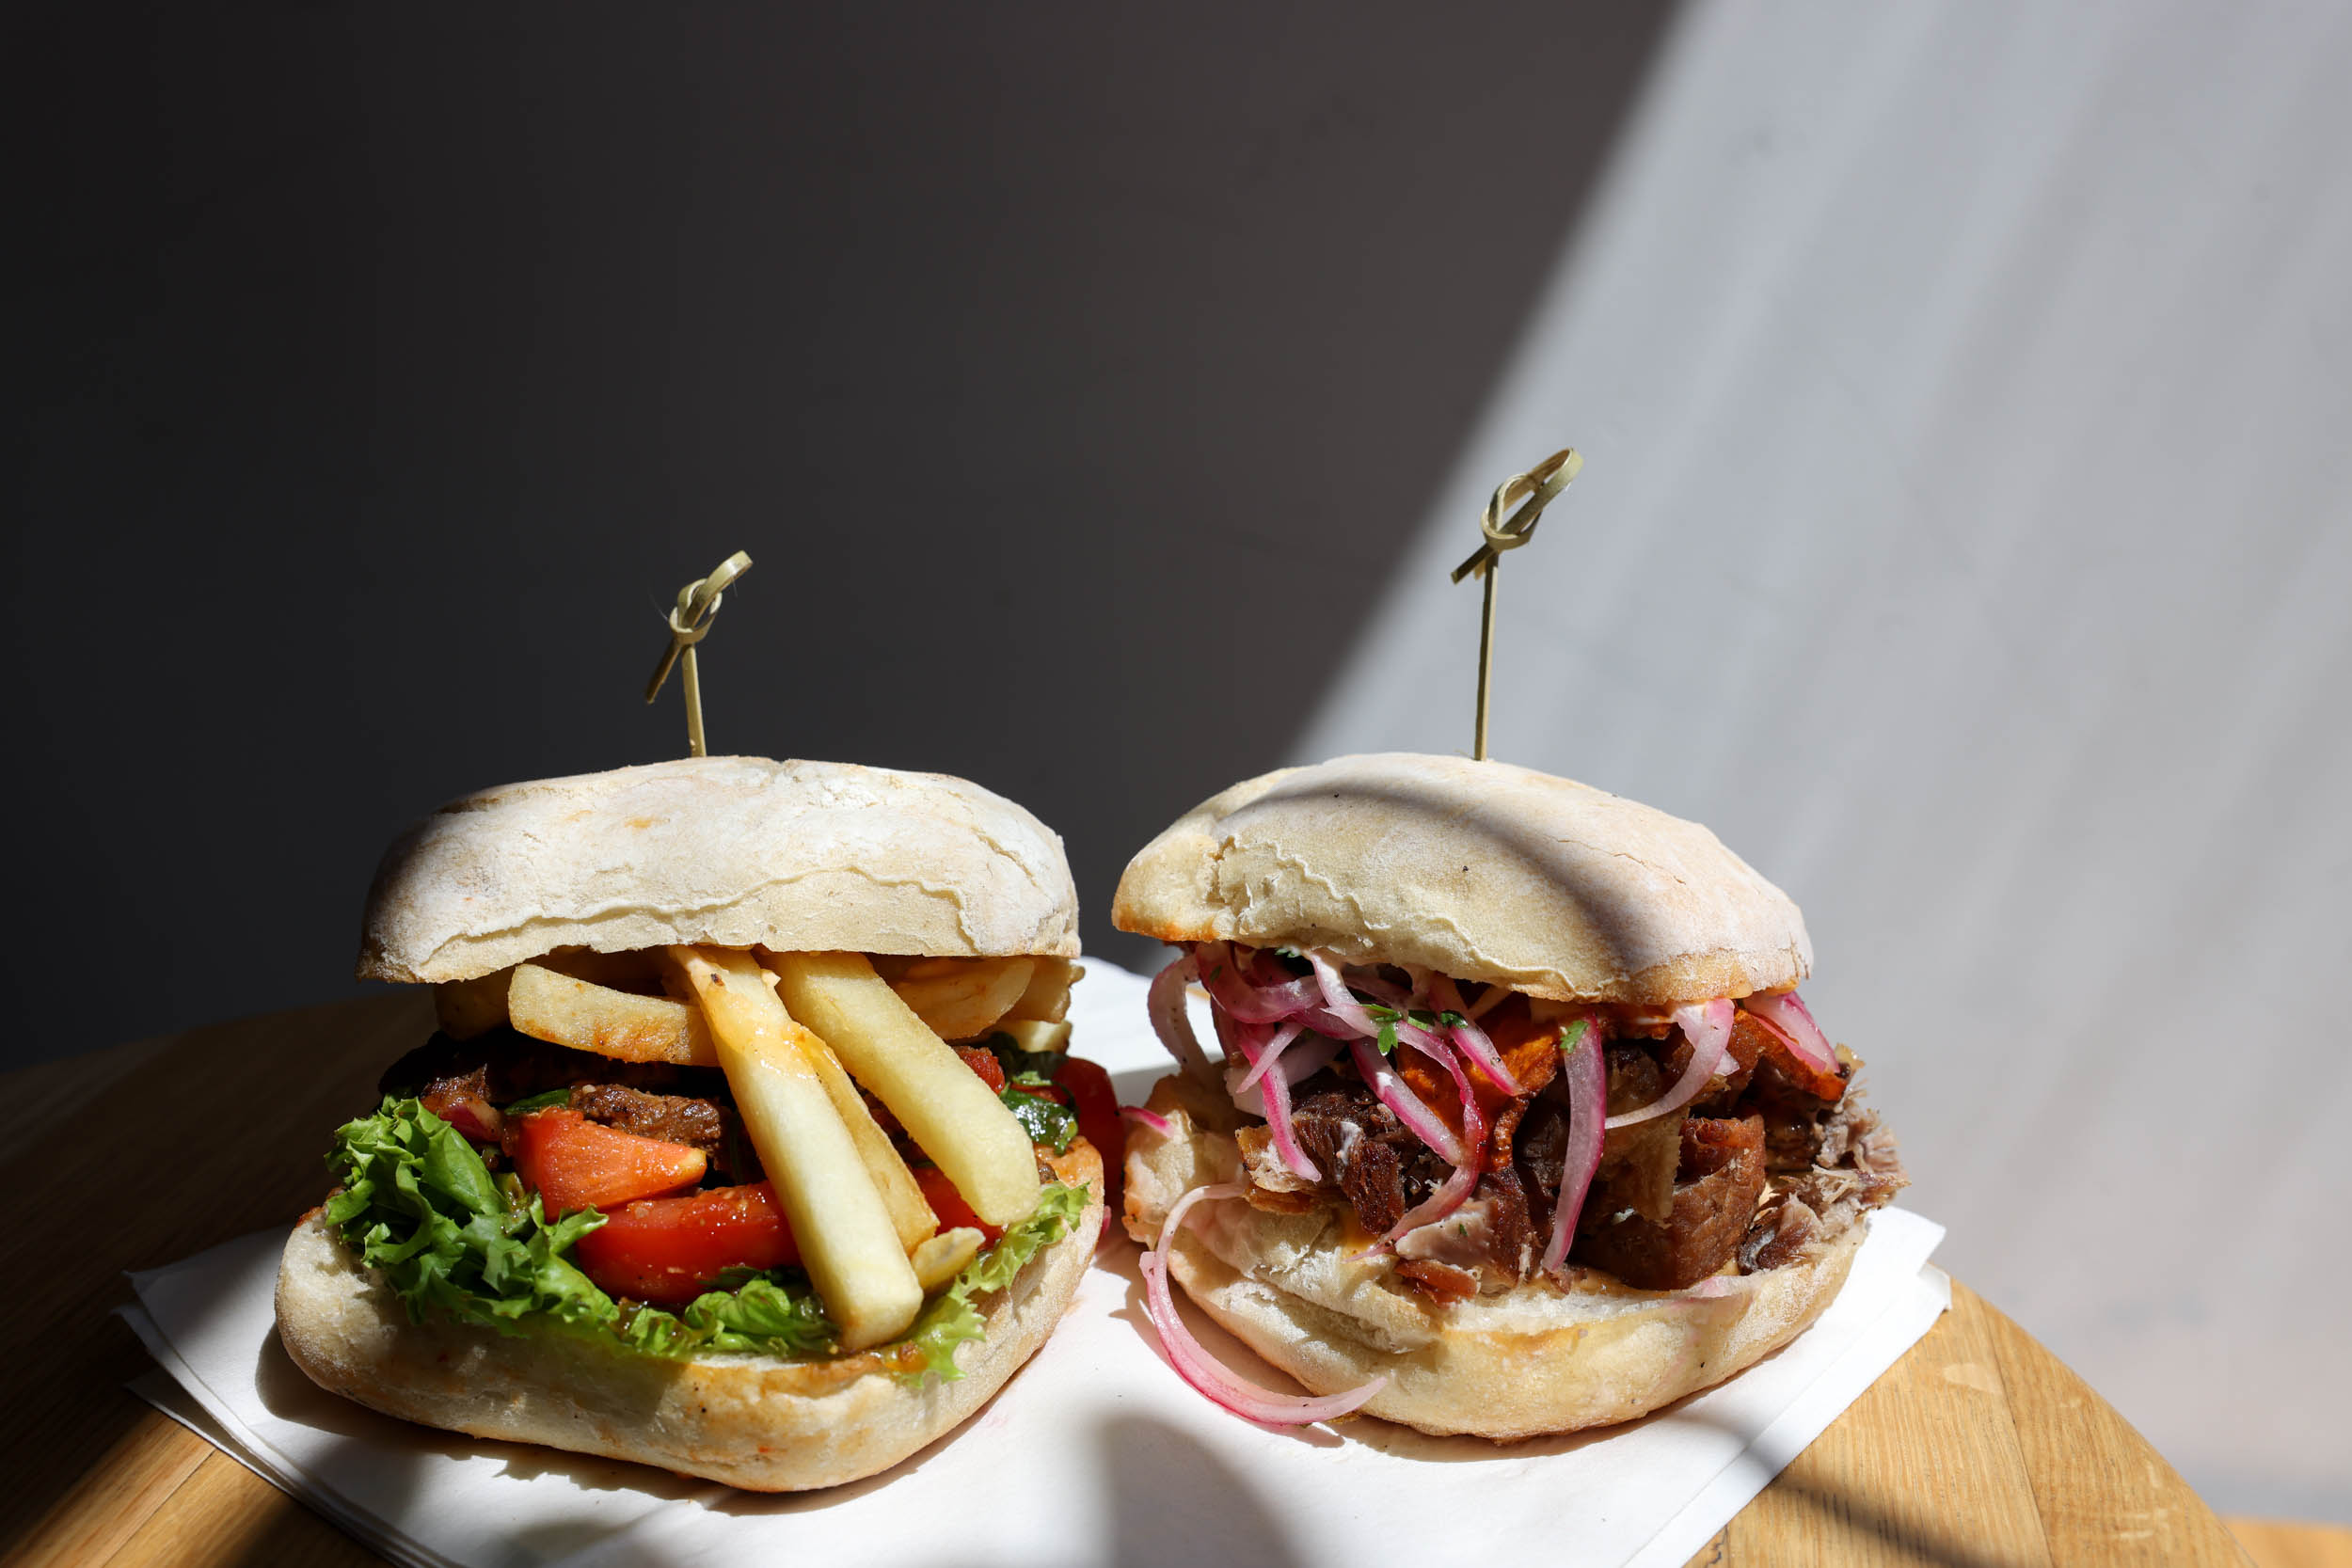 Sanguchitos by Brasas now open inside Perennial Artisan Ales in South City  serving Peruvian-inspired sandwiches